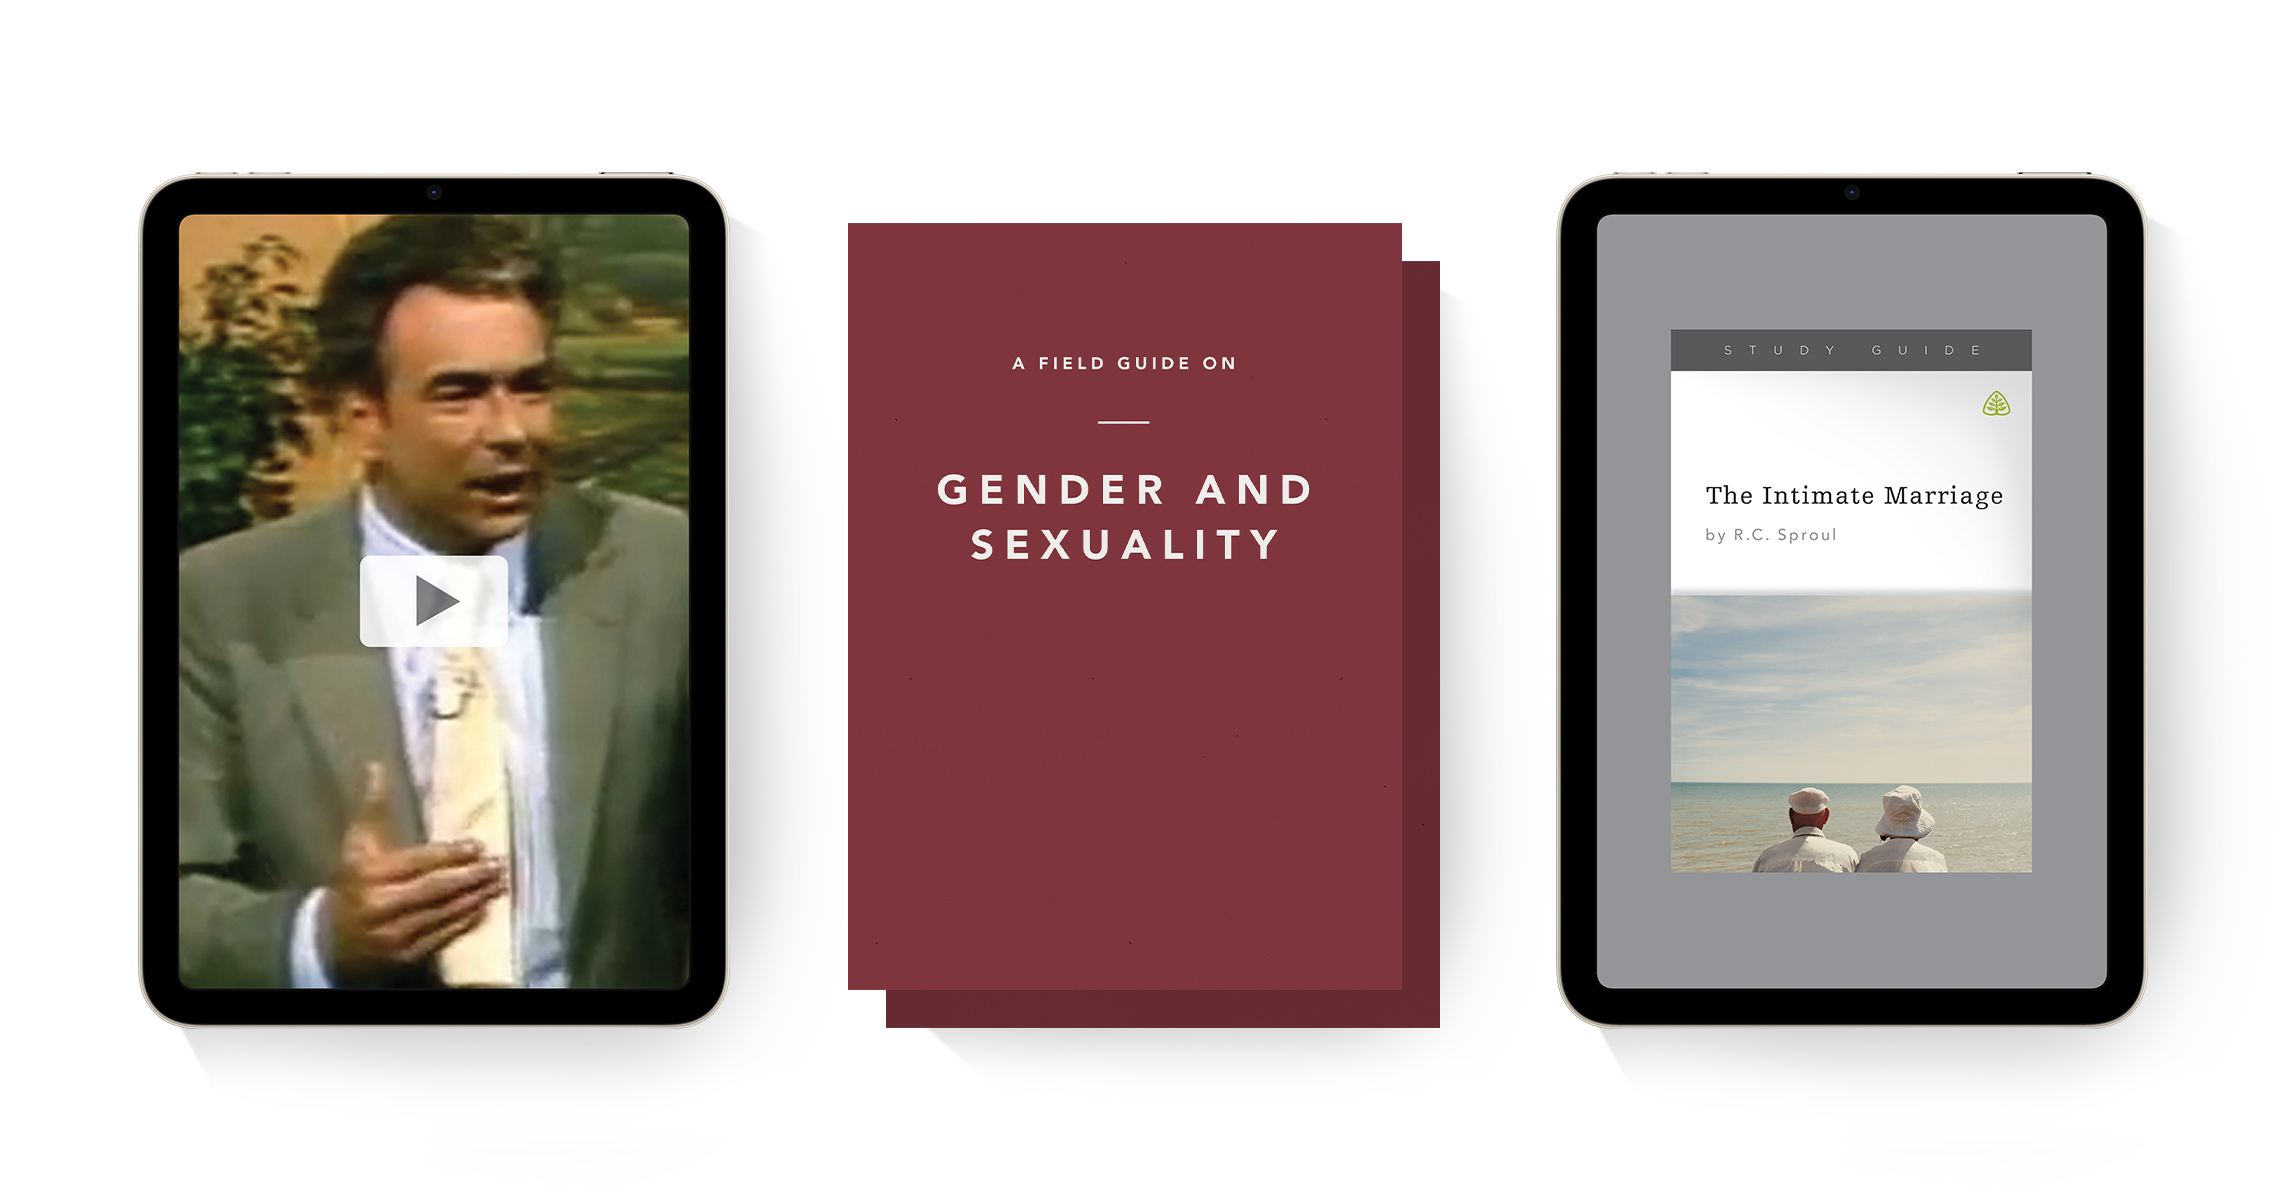 A Field Guide on Gender and Sexuality